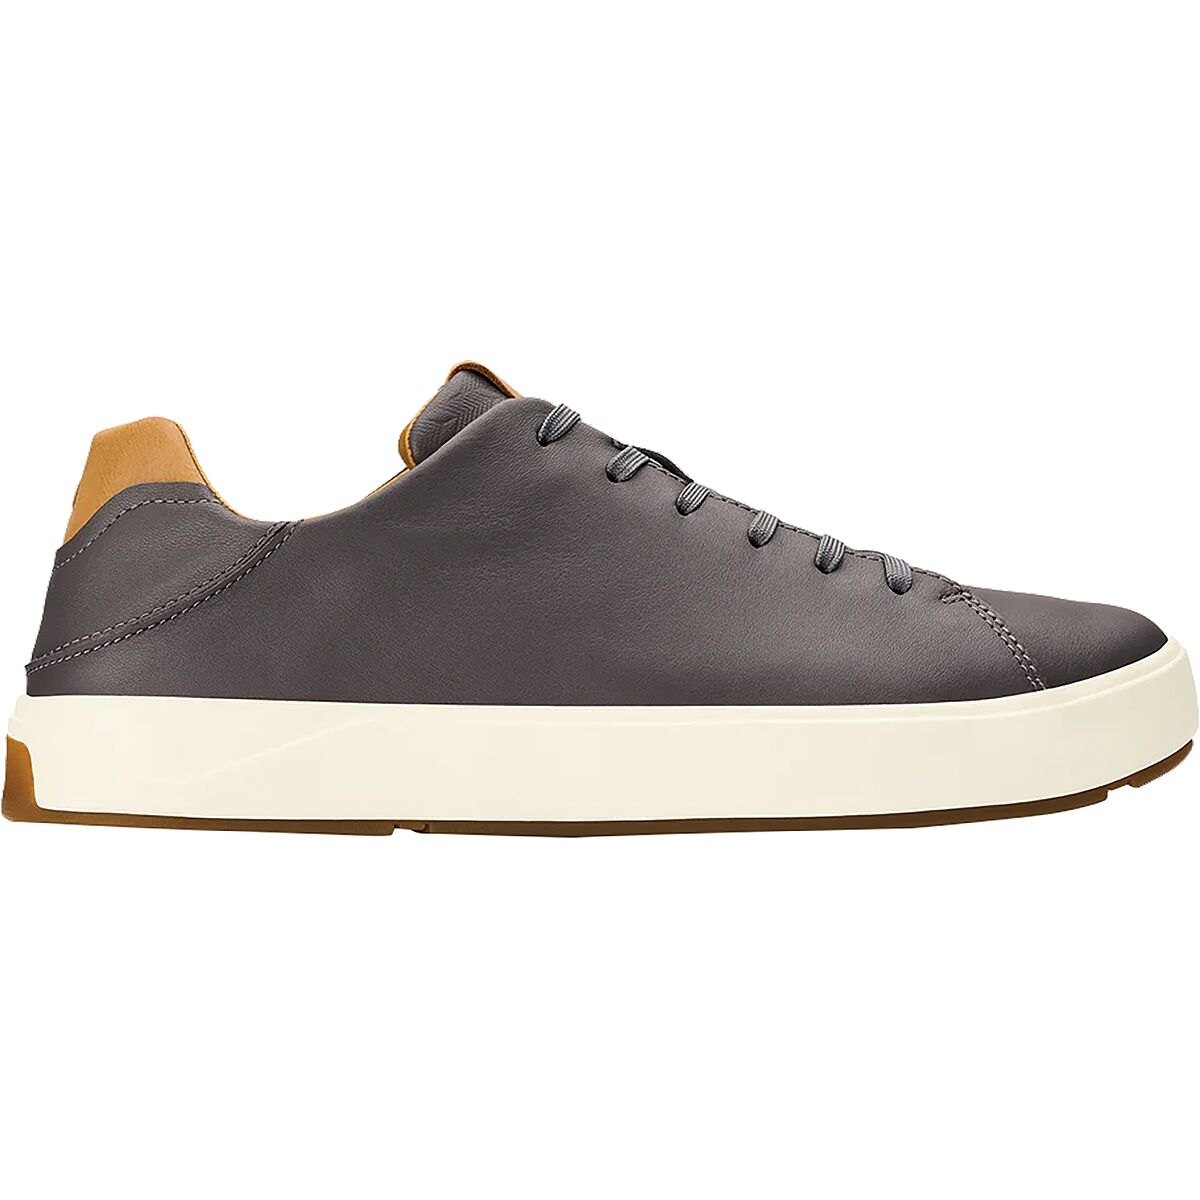 Olukai - Men's Casual Fashion Shoes and Sneakers